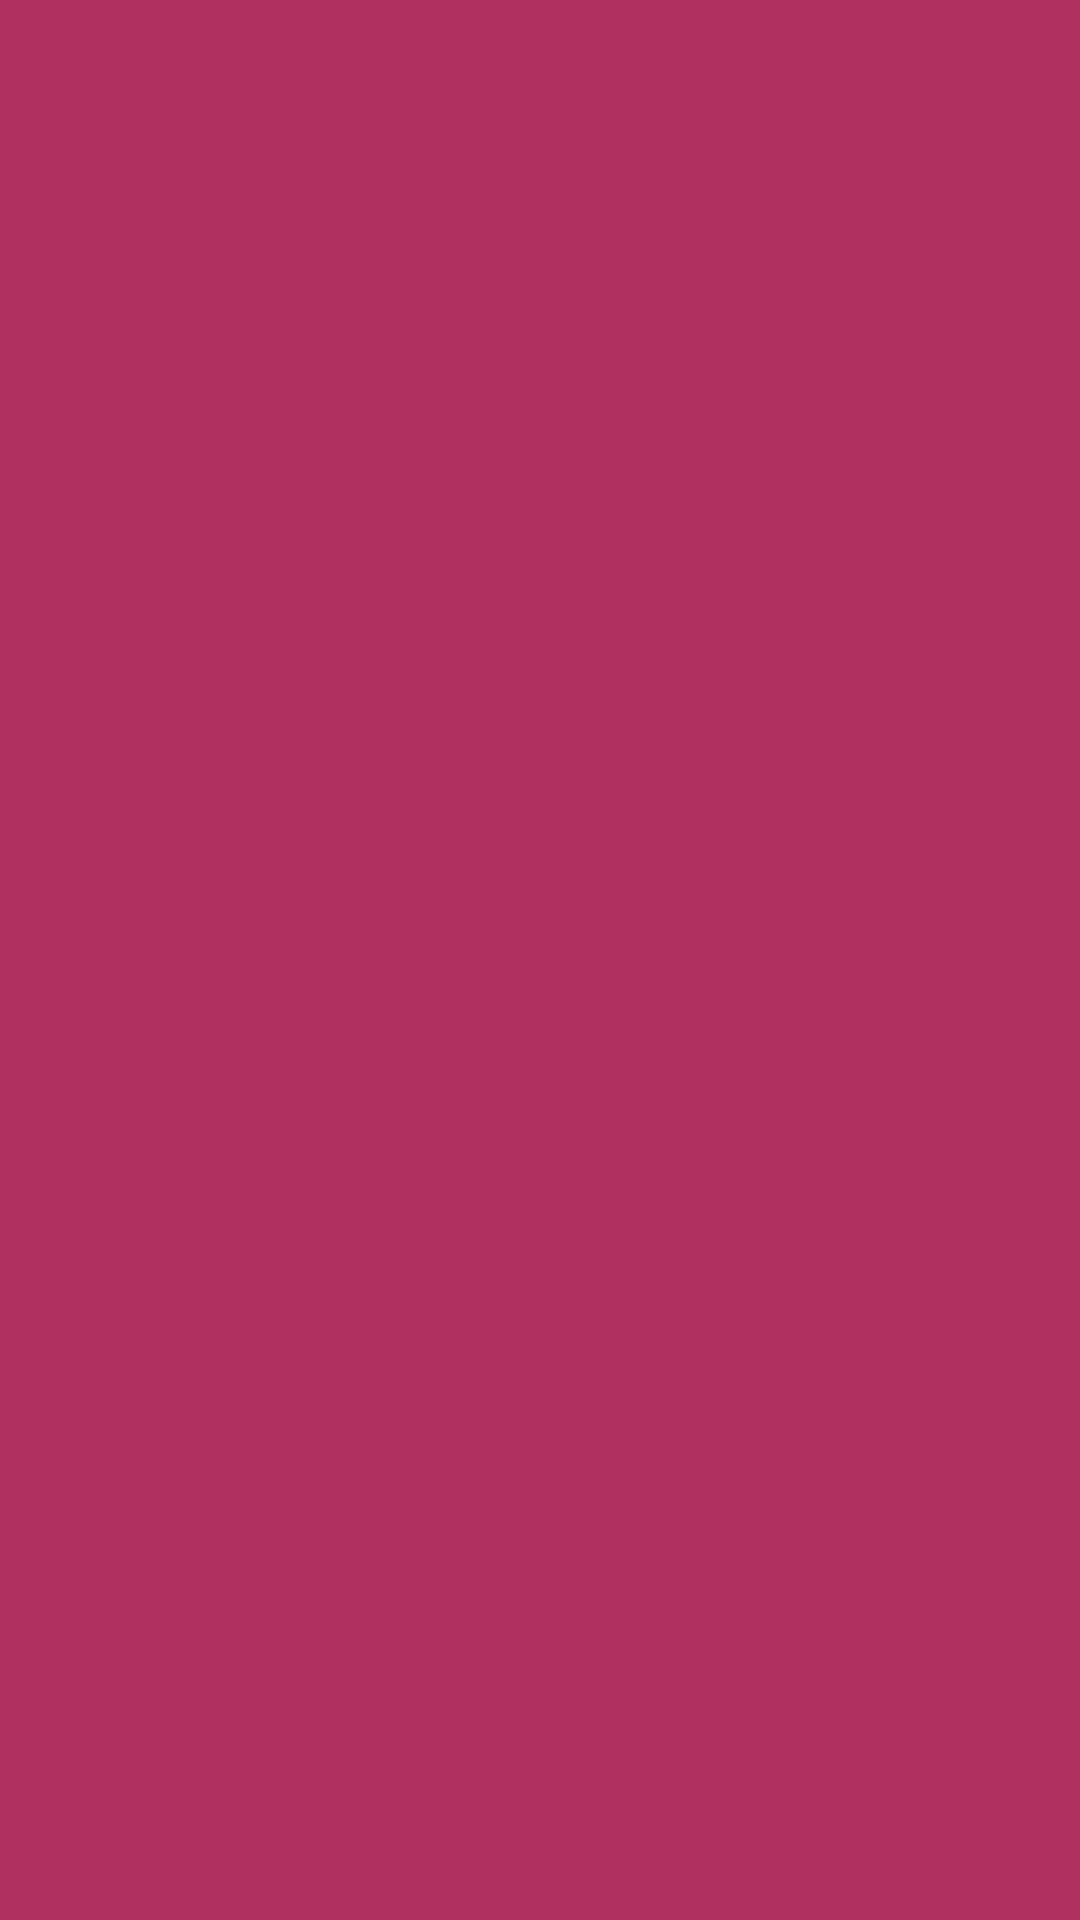 1080x1920 Maroon X11 Gui Solid Color Background